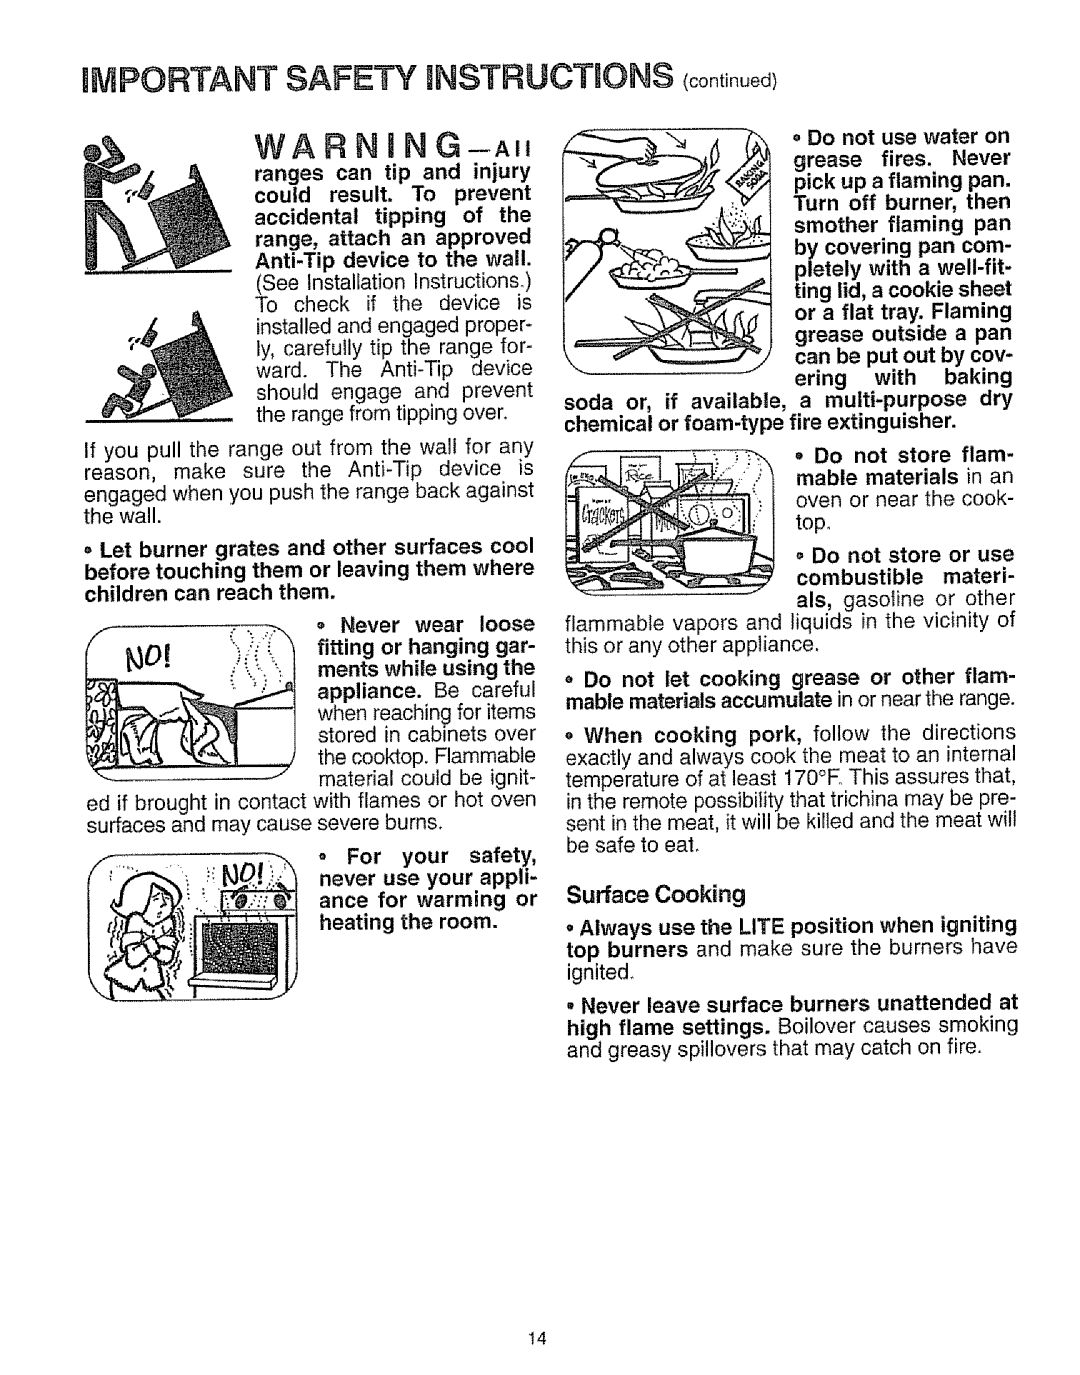 Sears 73311, 73328, 73321, 73318 manual IMPORTANT SAFE3= I INSTRUCTIONS continued, WARNING-Am1, Surface Cooking, ering 